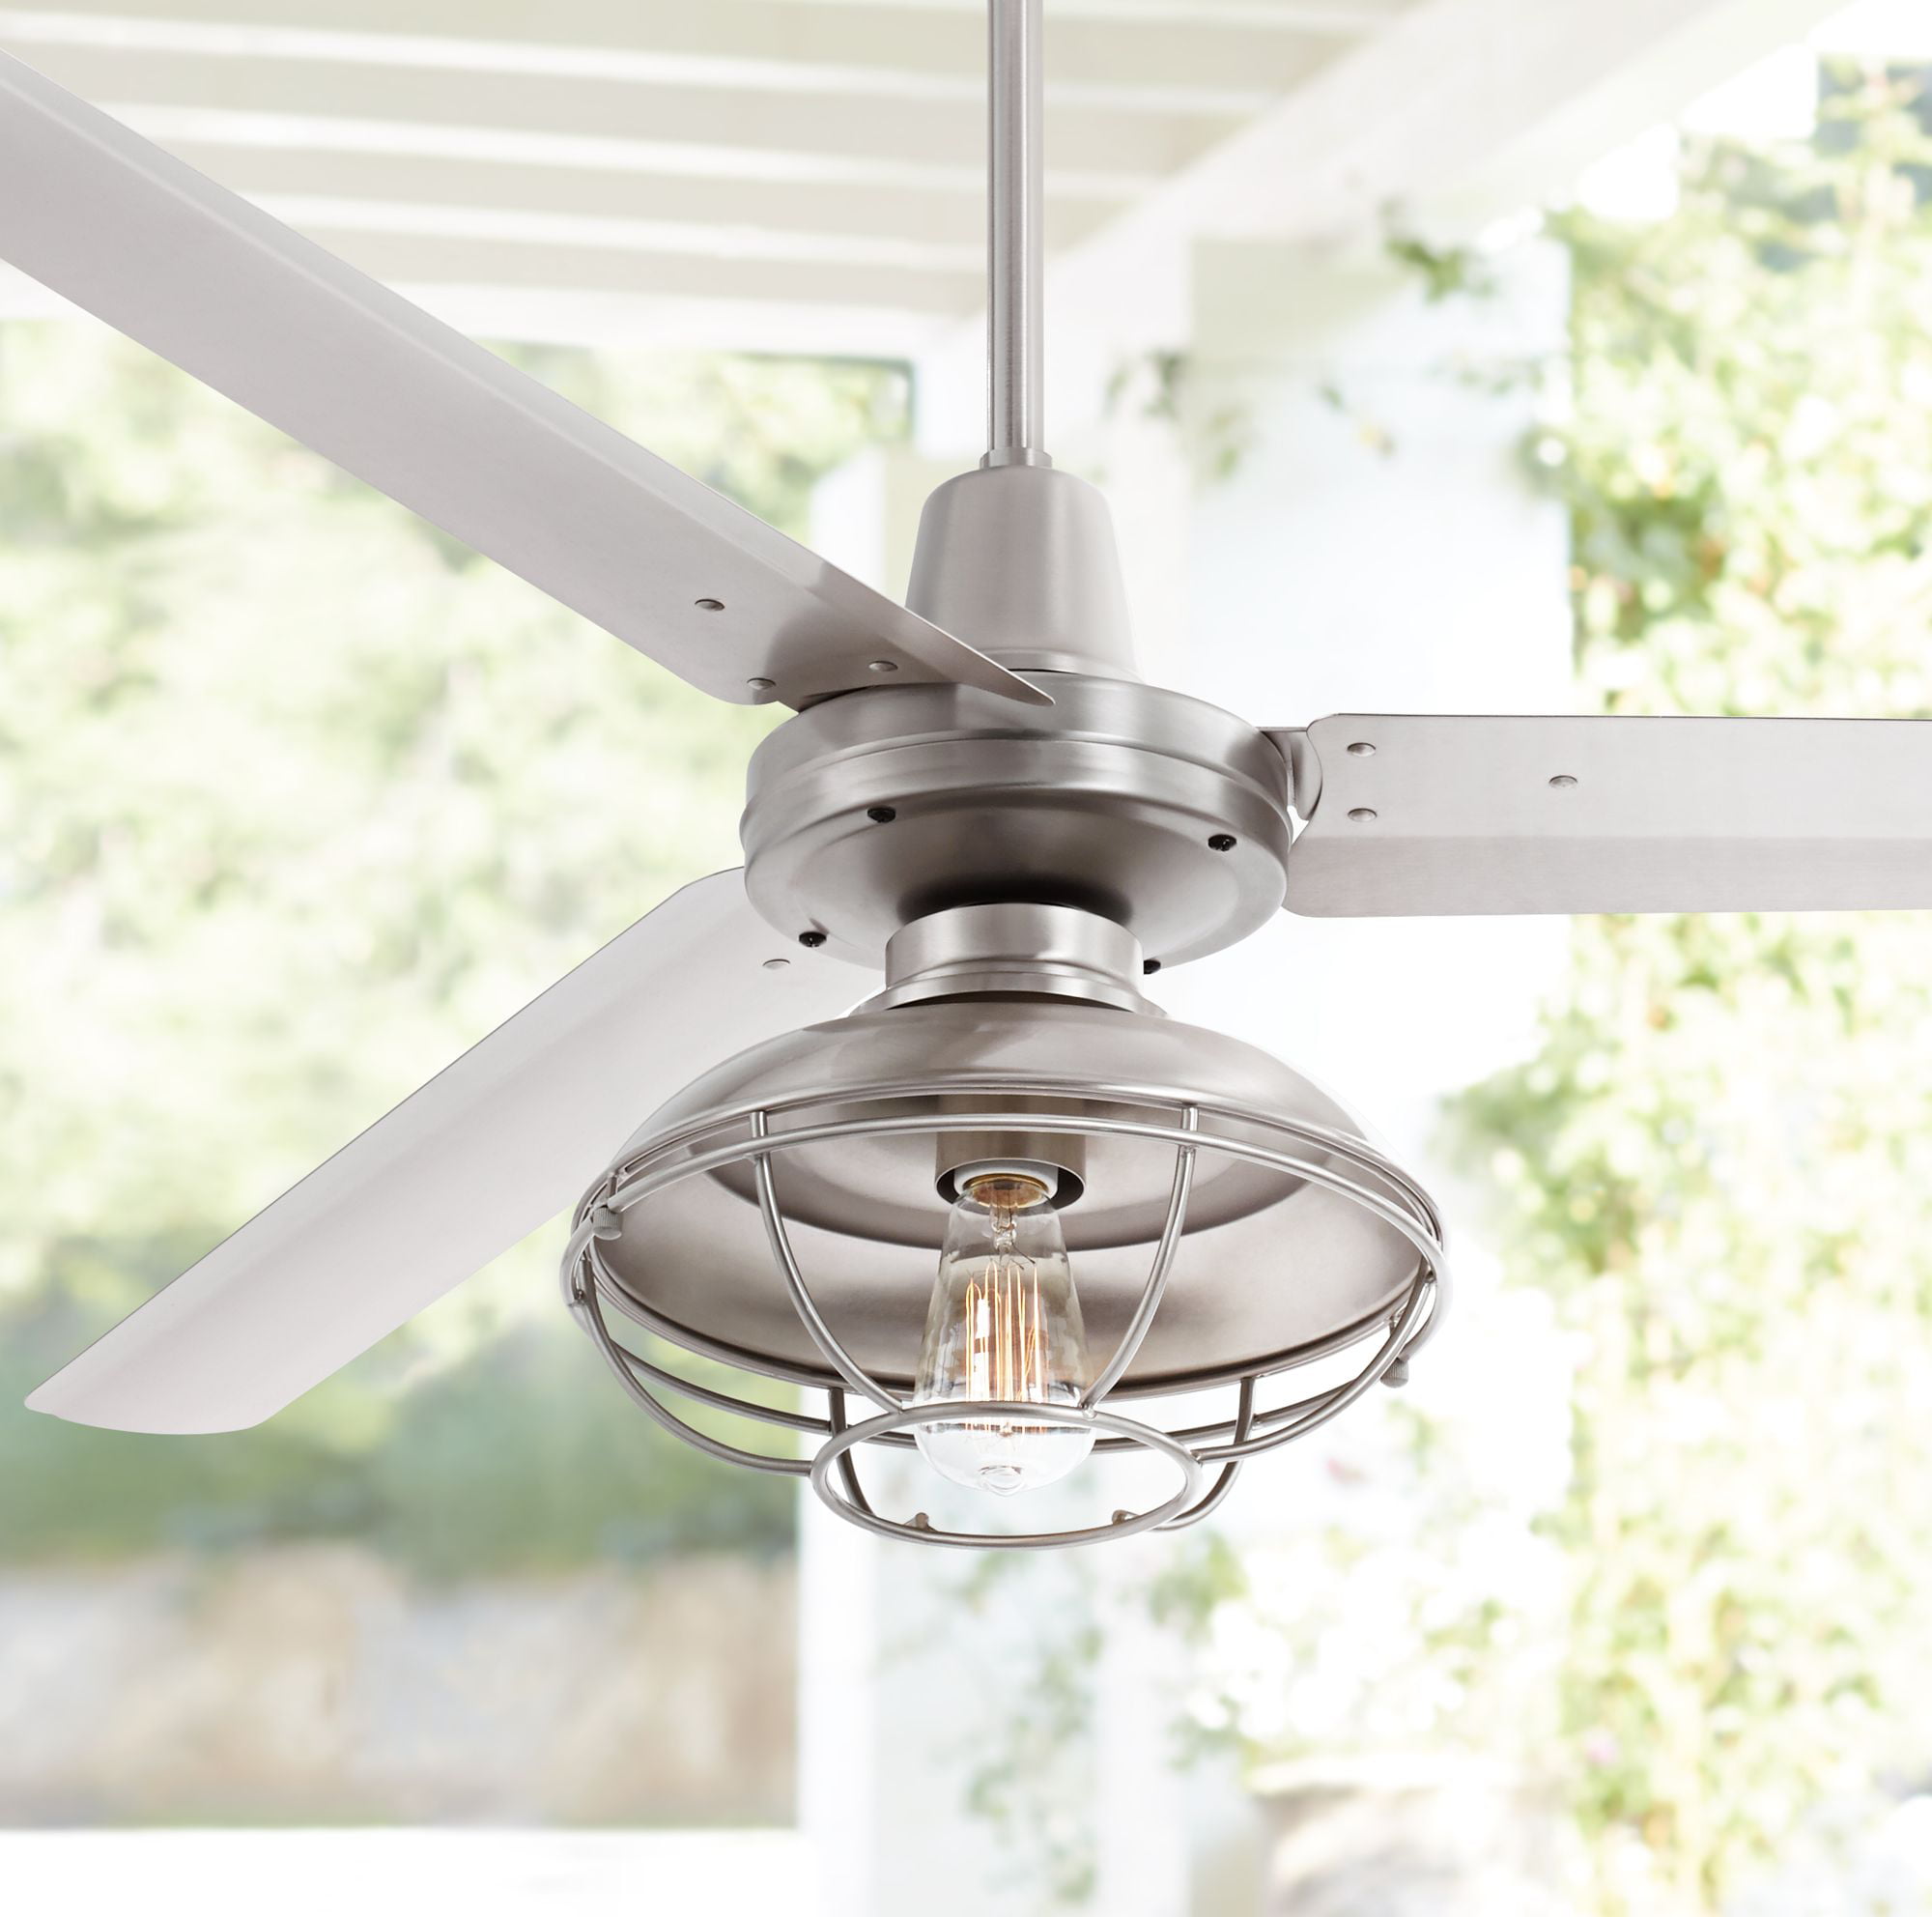 Patio Ceiling Fans With Lights : 9 Types of Outdoor Lights for Your Home : Kichler lighting lyndon patio collection 60 inch distressed black ceiling fan w light.